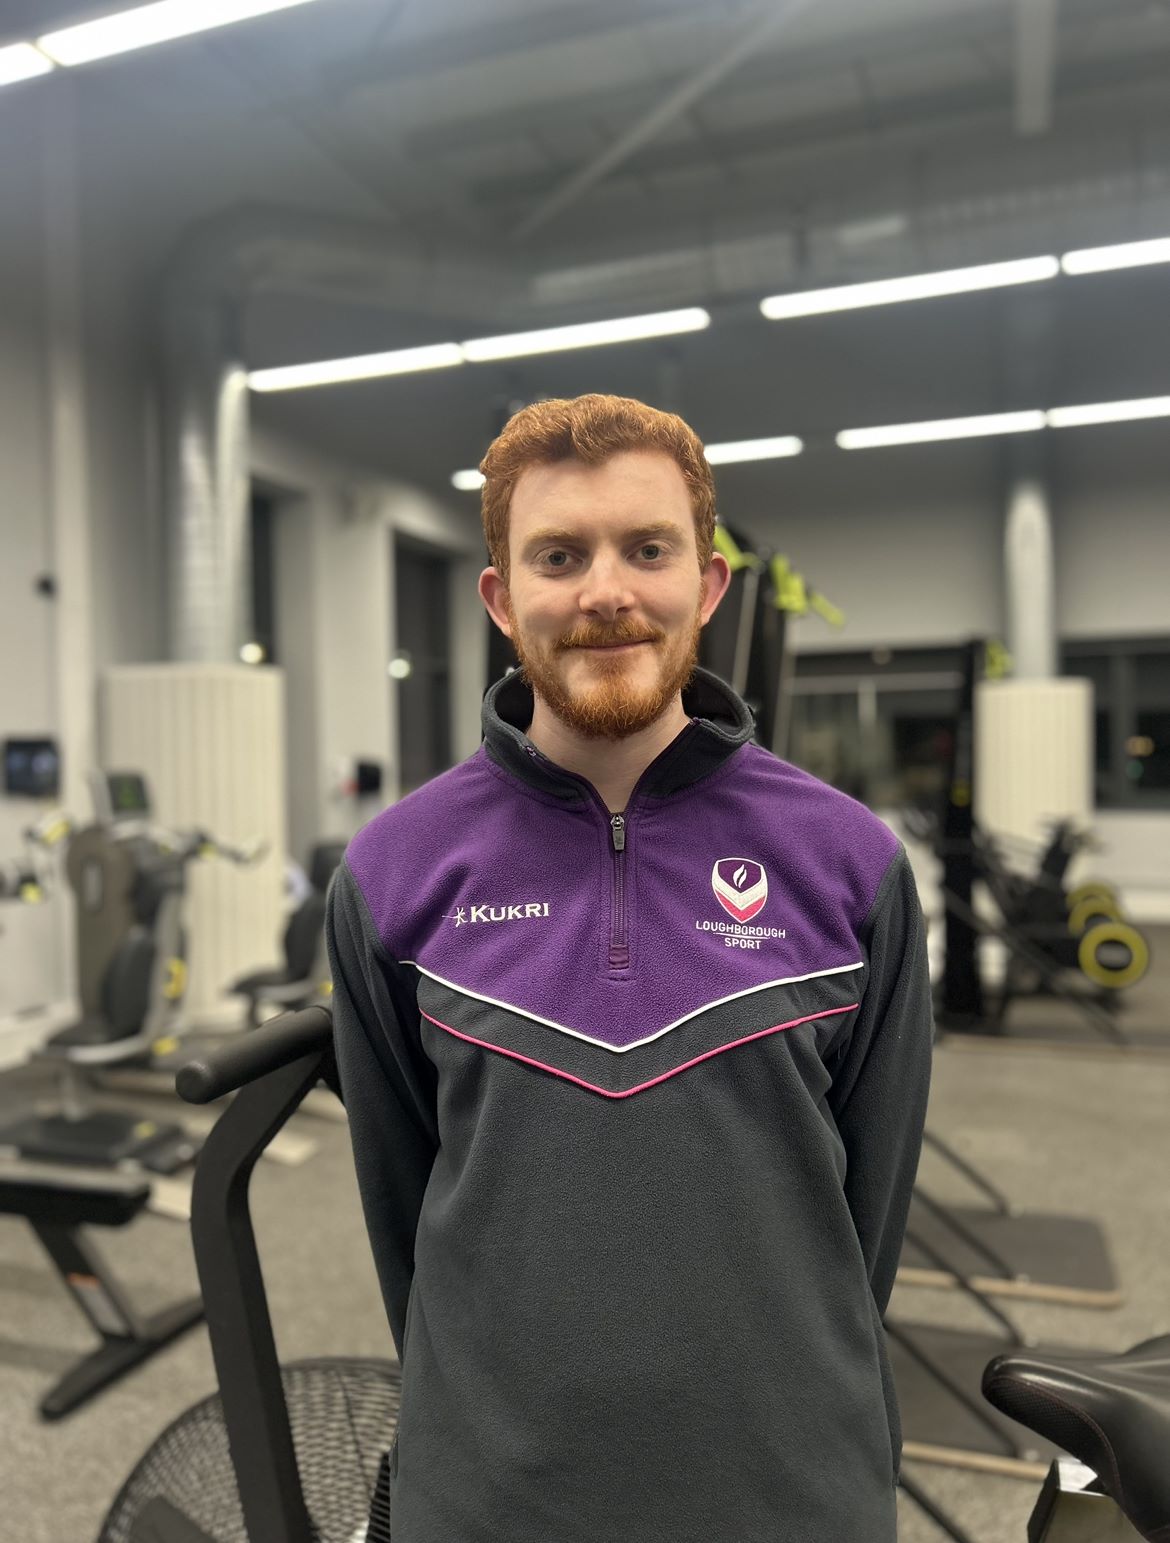 Fitness Coach, Luke, standing in front of an exercise bike smiling.